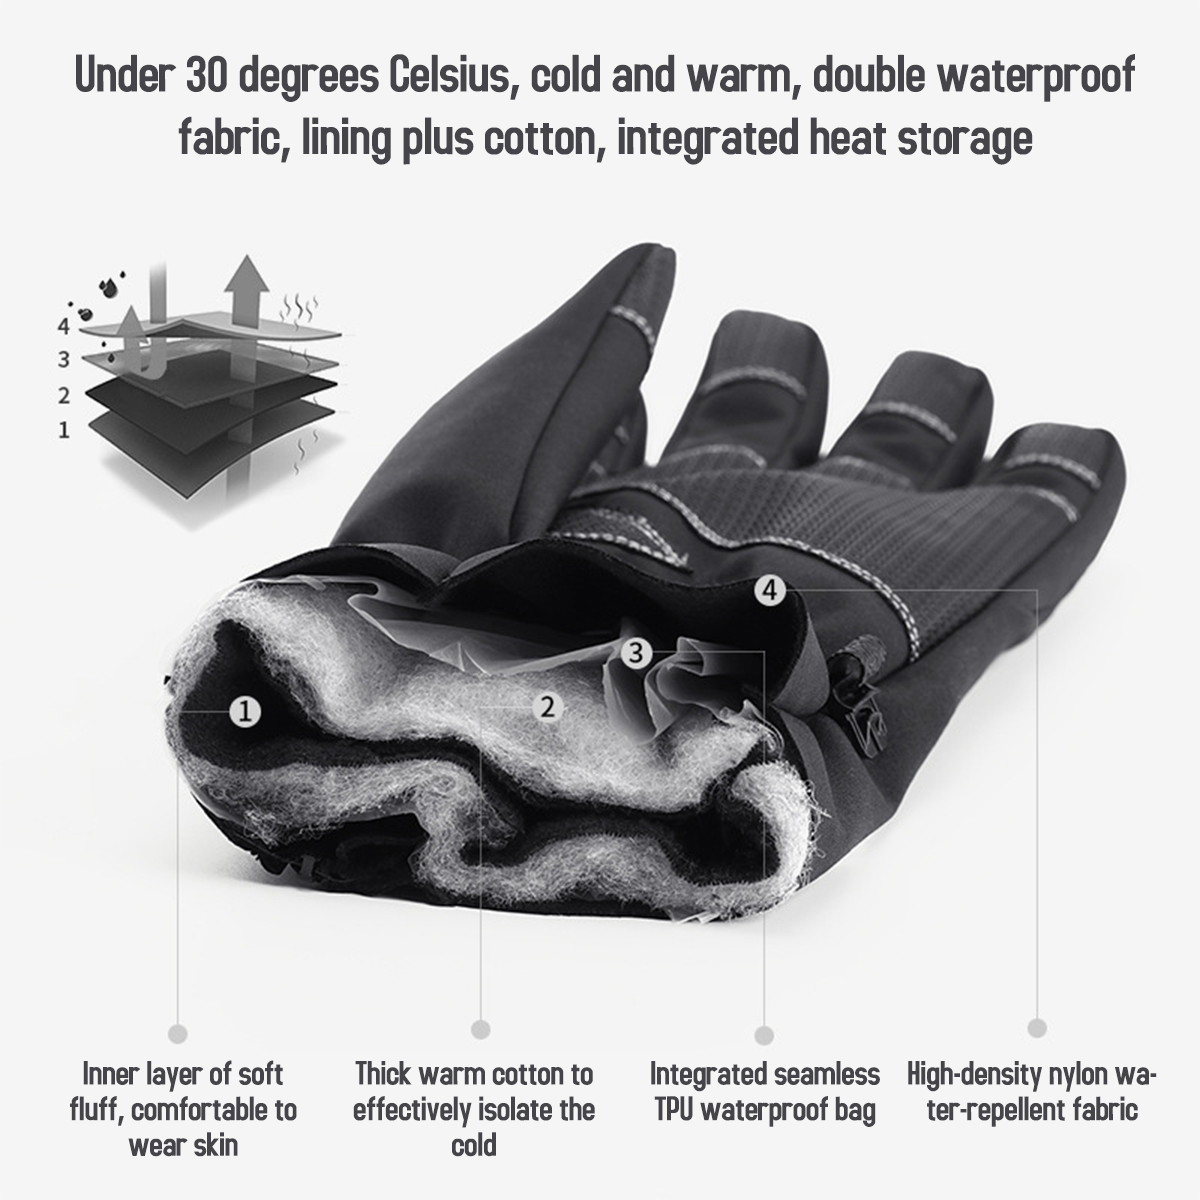 Windstopers-Skiing-Gloves-Anti-Slip-Touchscreen-Breathable-Water-Repellent-Zipper-Warm-Glove-1580293-7